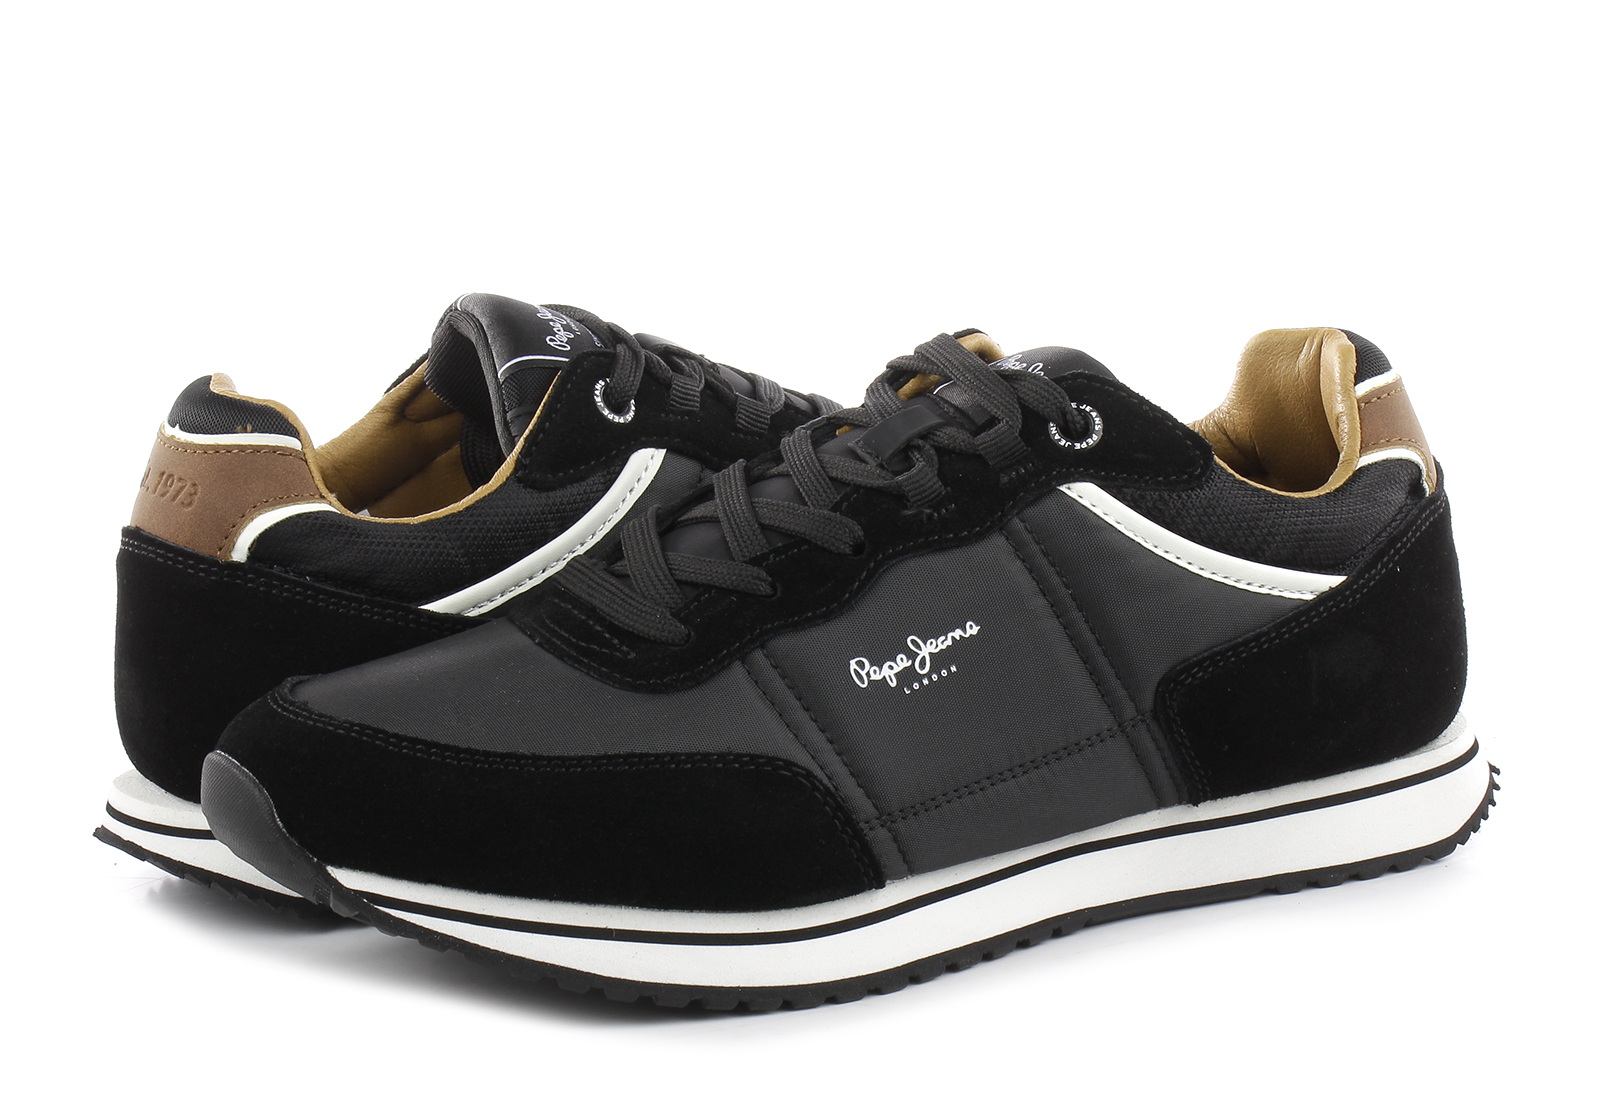 Pepe Jeans Sneakersy Tour Classic